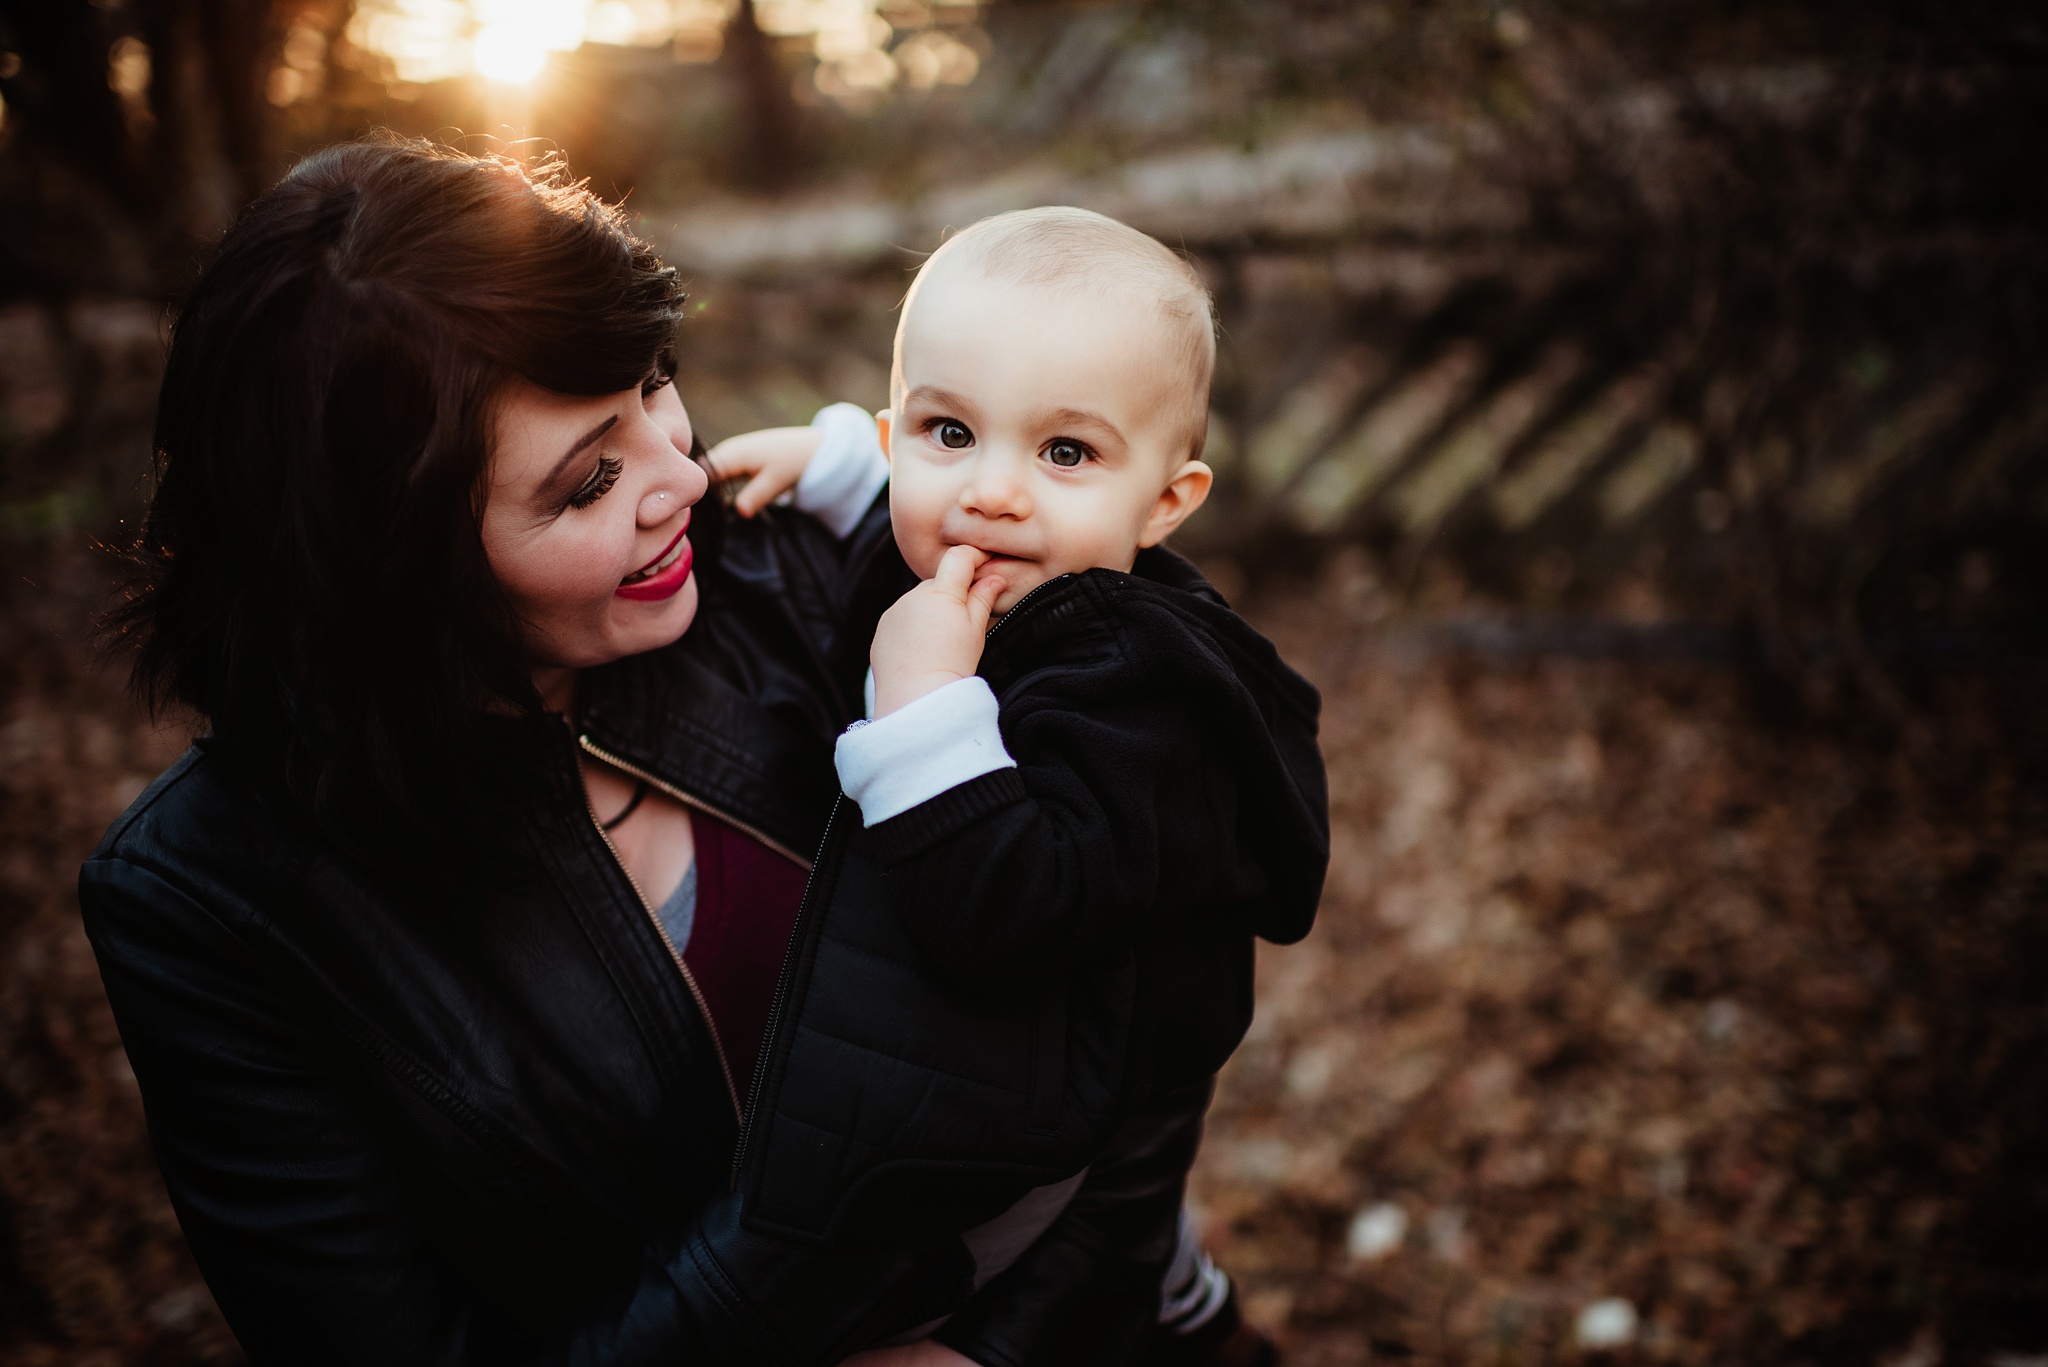 Sunset Family Session at Mormon Coulee Memorial Park